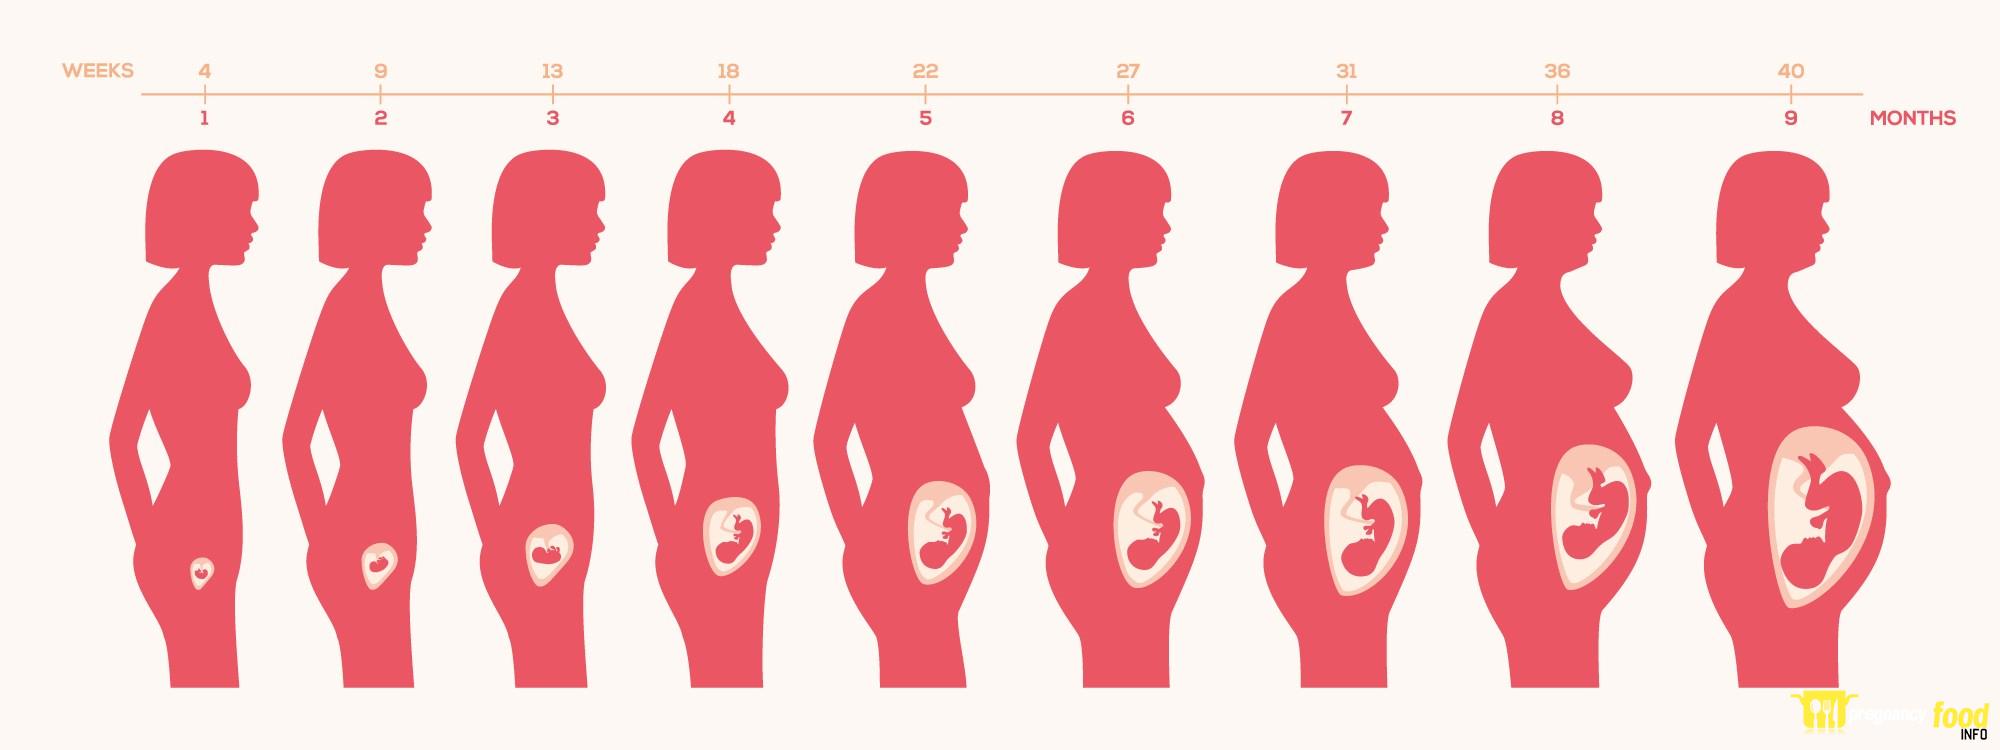 How Big is a Baby at 22 Weeks?